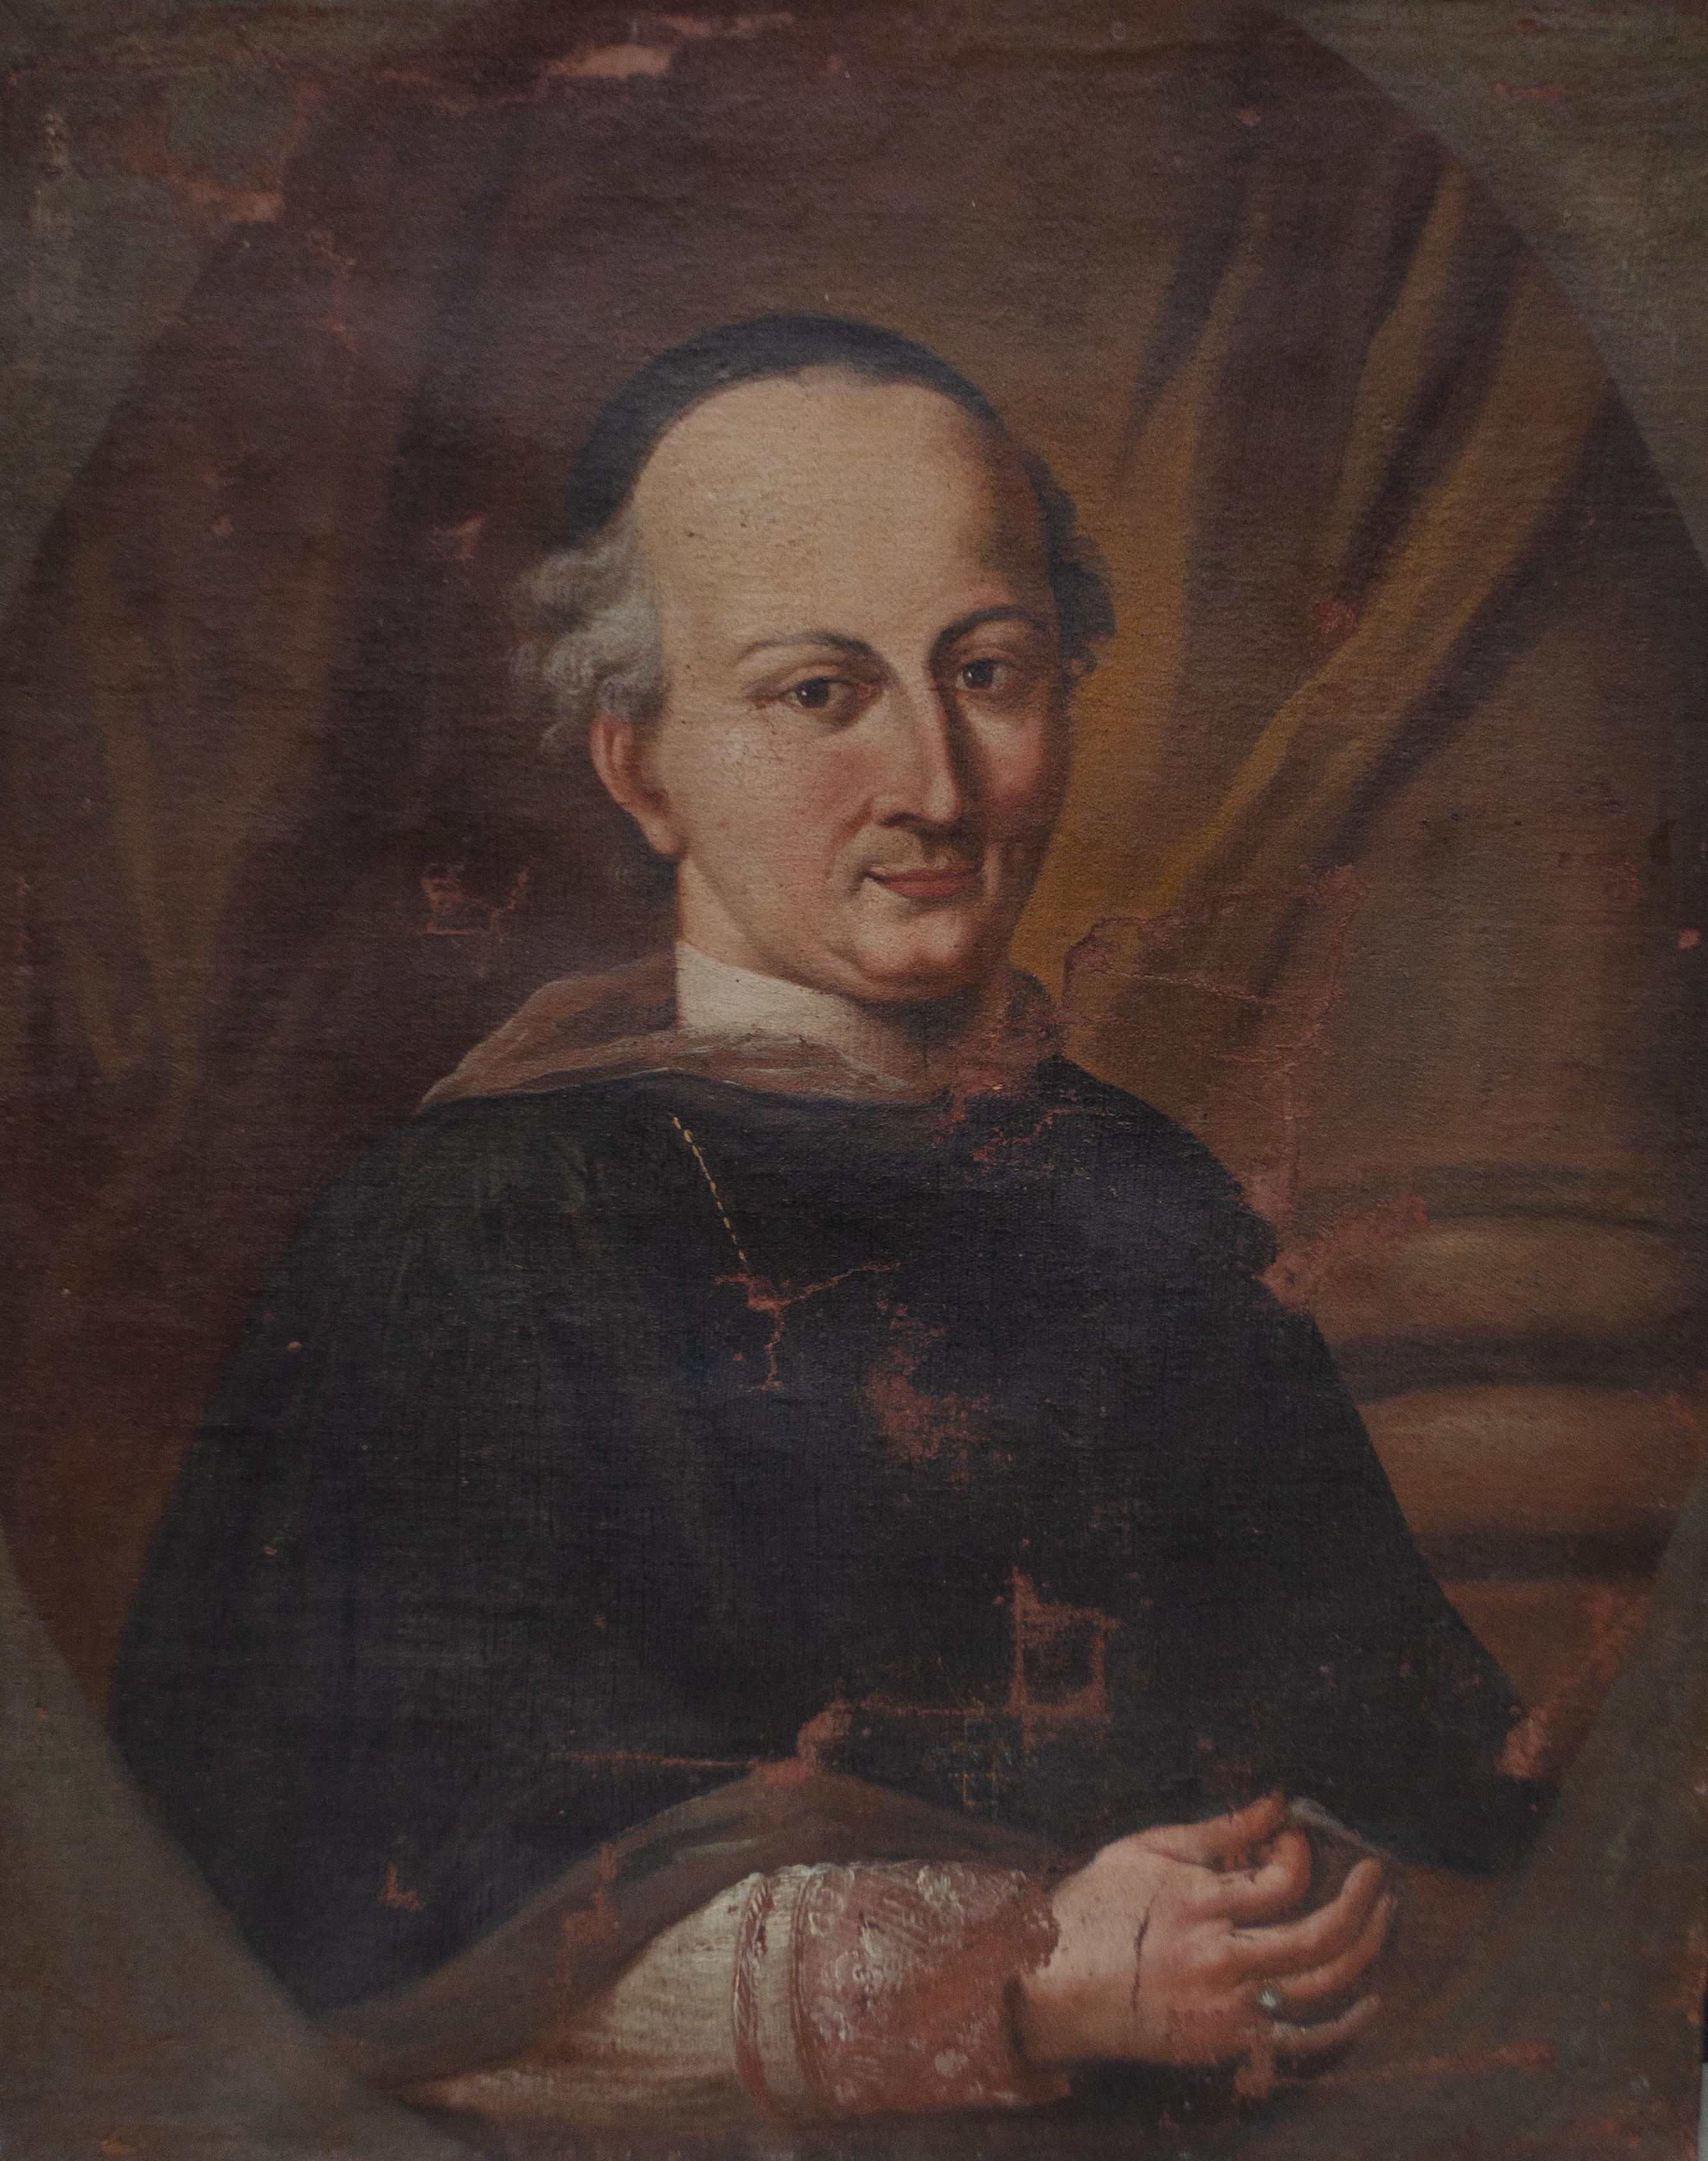 Portrait of Bishop of Verona Giovanni Morosini (1719 - 1789), Italian school.

Technique: oil on canvas painting, relined canvas.

Late 18th century.
Represents a church man.
The figure of Monsignor Giovanni Morosini is depicted against the